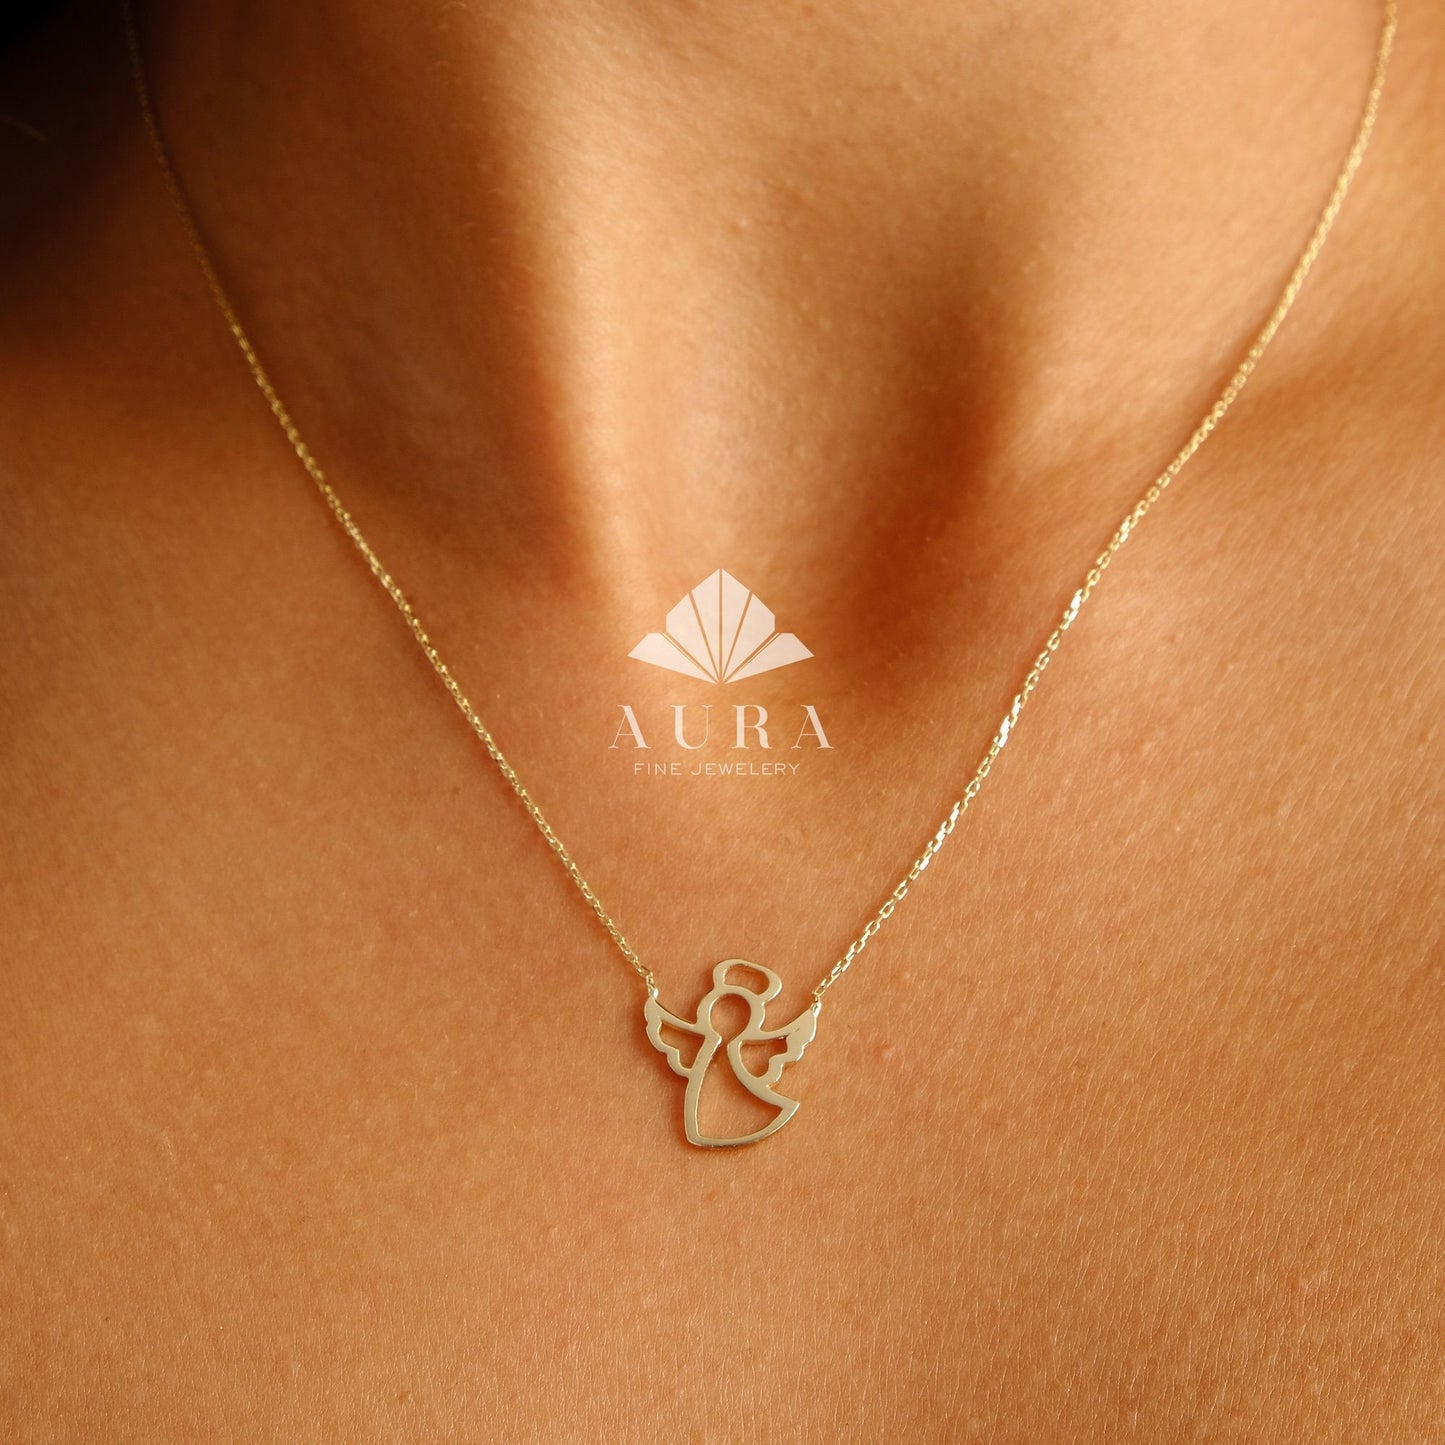 14K Gold Angel Necklace, Guardian Angel Pendant, Dainty Angel Necklace, Protection Jewelry, Angel Charm Necklace, Christmas Gift